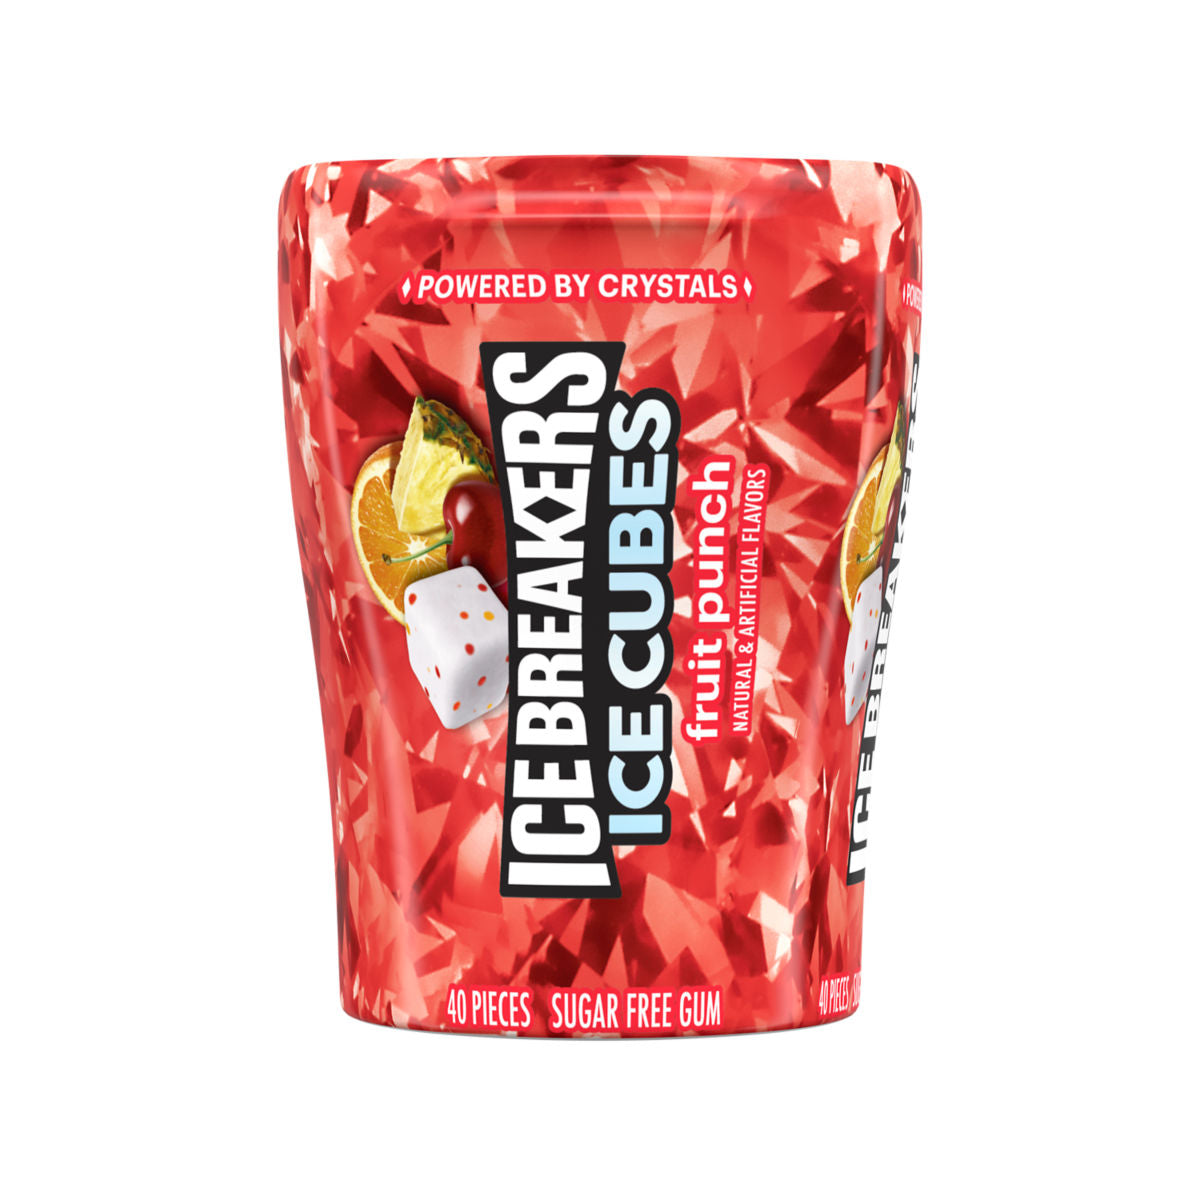 Ice Breakers Ice Cubes Fruit Punch Flavored Gum Bottle Pack 6ct ...